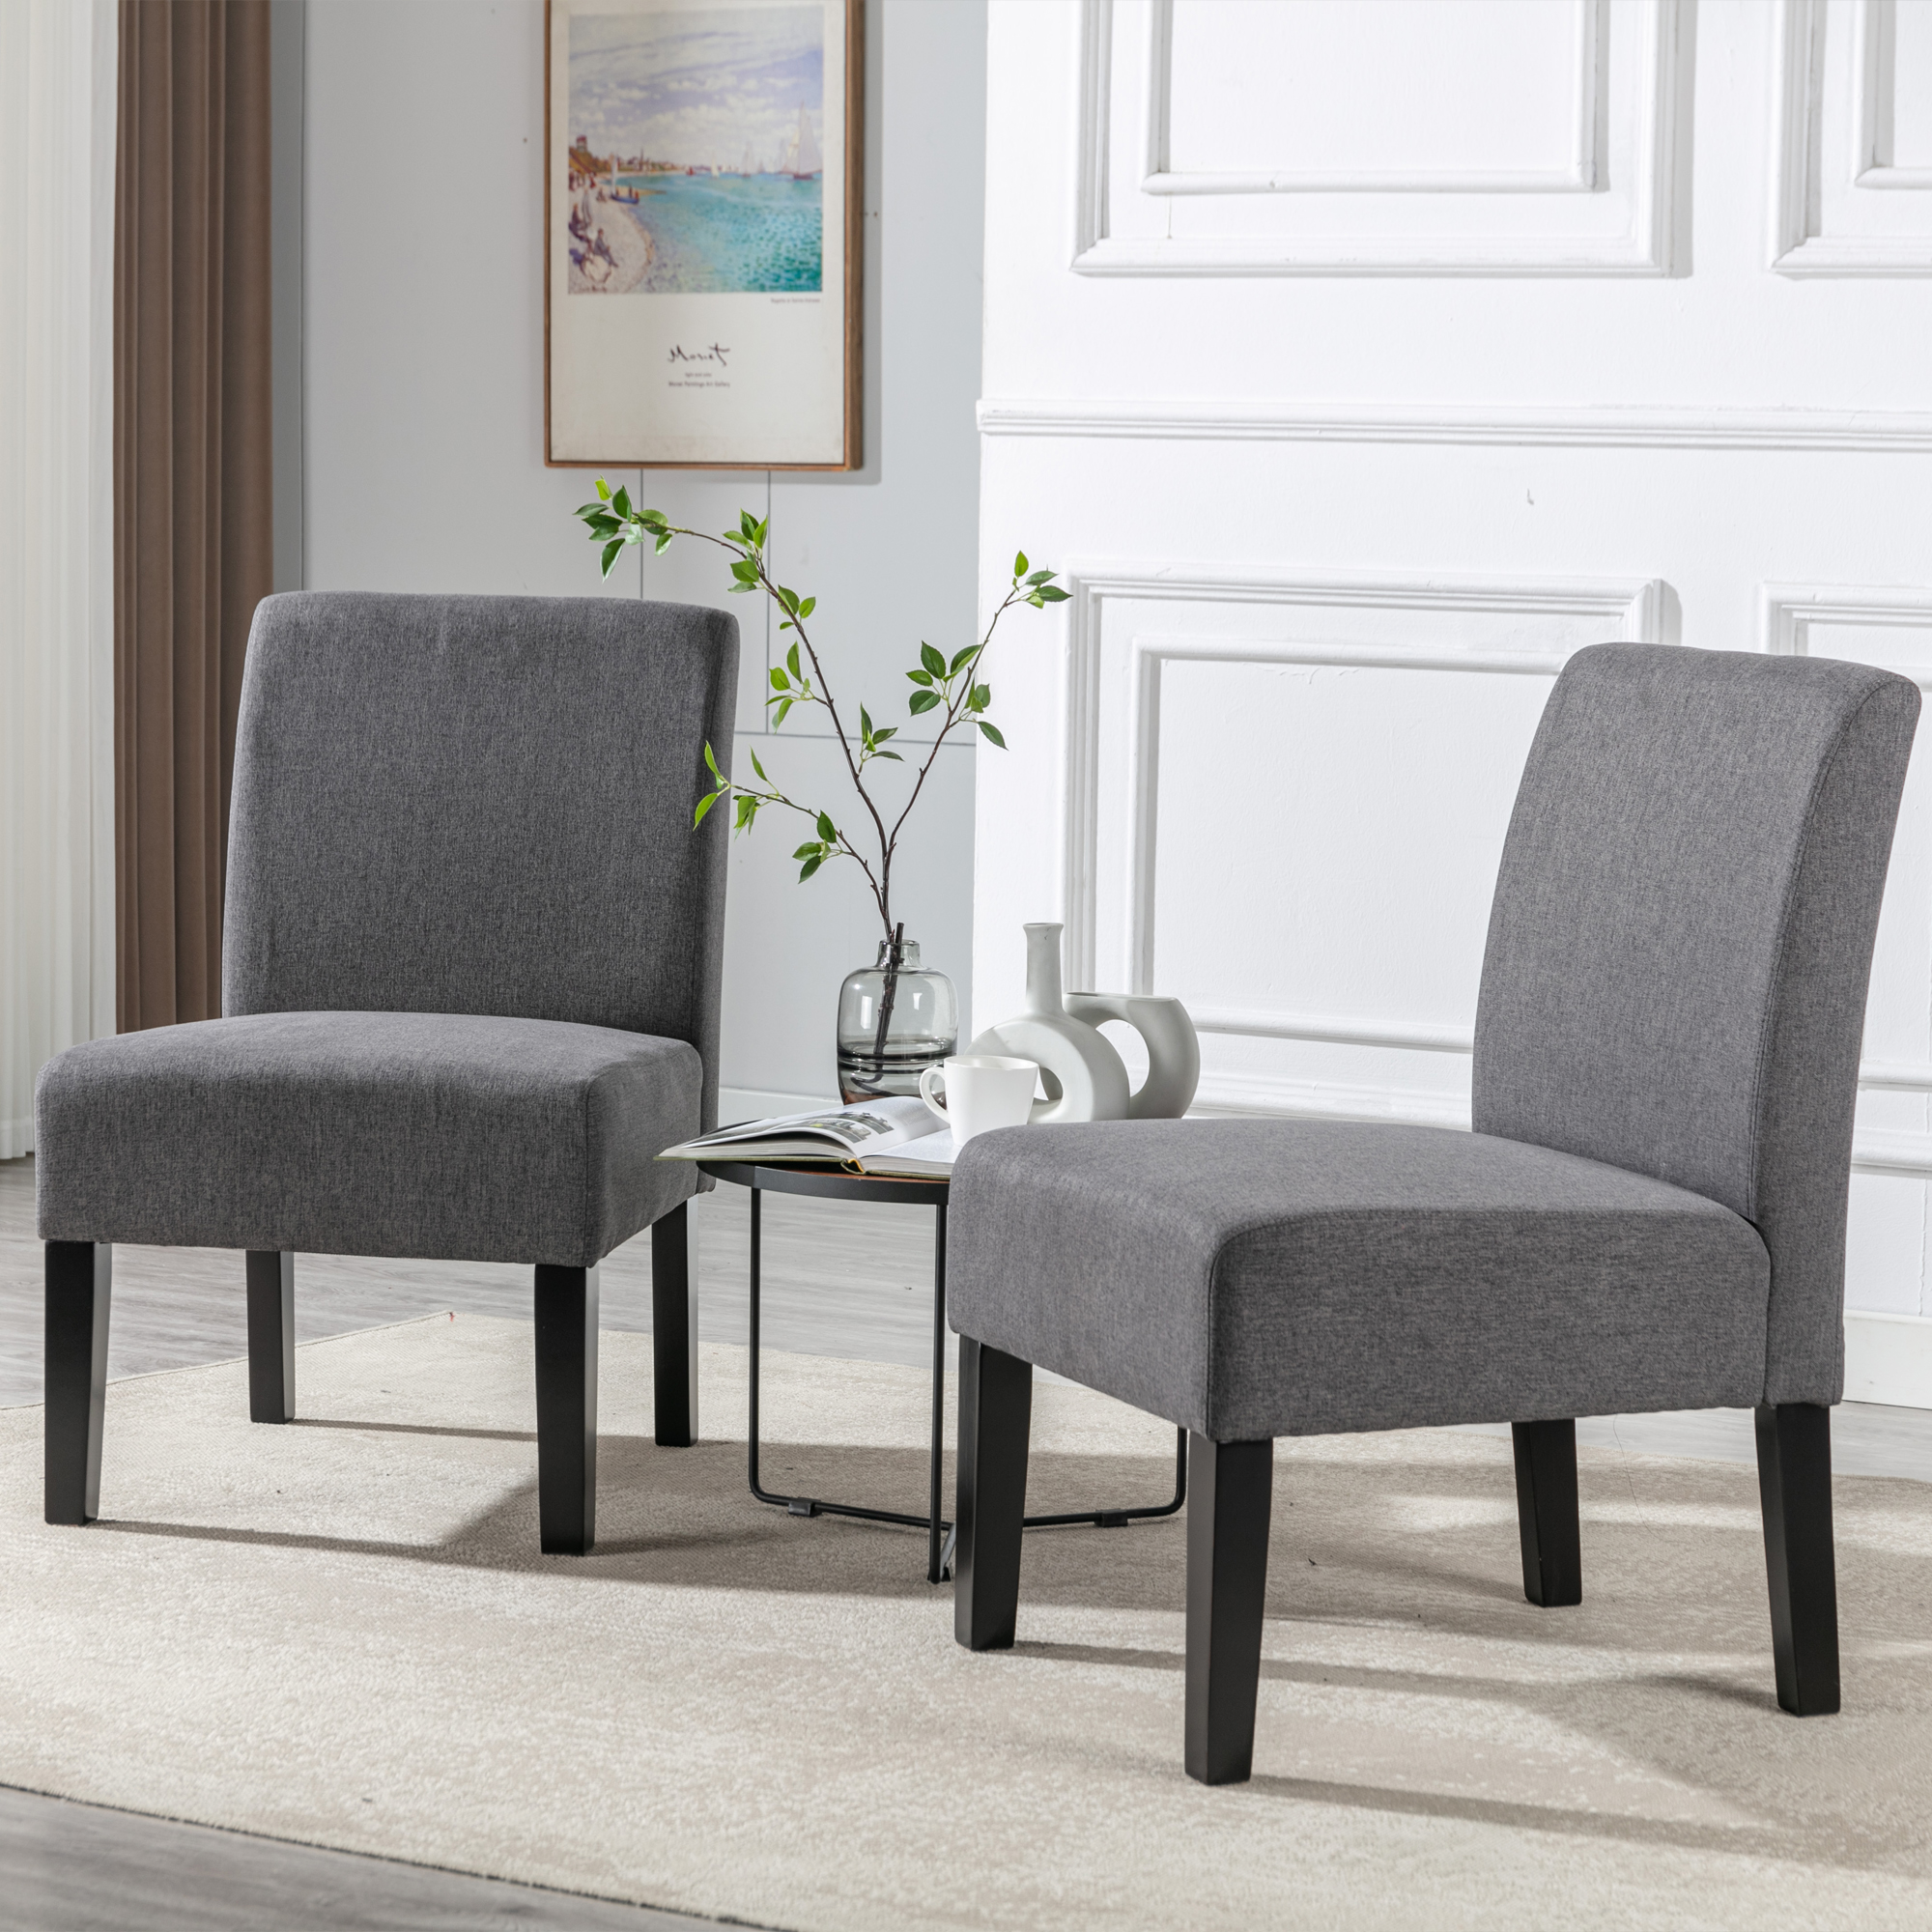 Hengming Living Room Chairs Armless Accent Chairs Set of 2 Side Chairs fabric Sofa Chair Modern  Sitting Chair Slipper Chair for Bedroom Reading Gray.